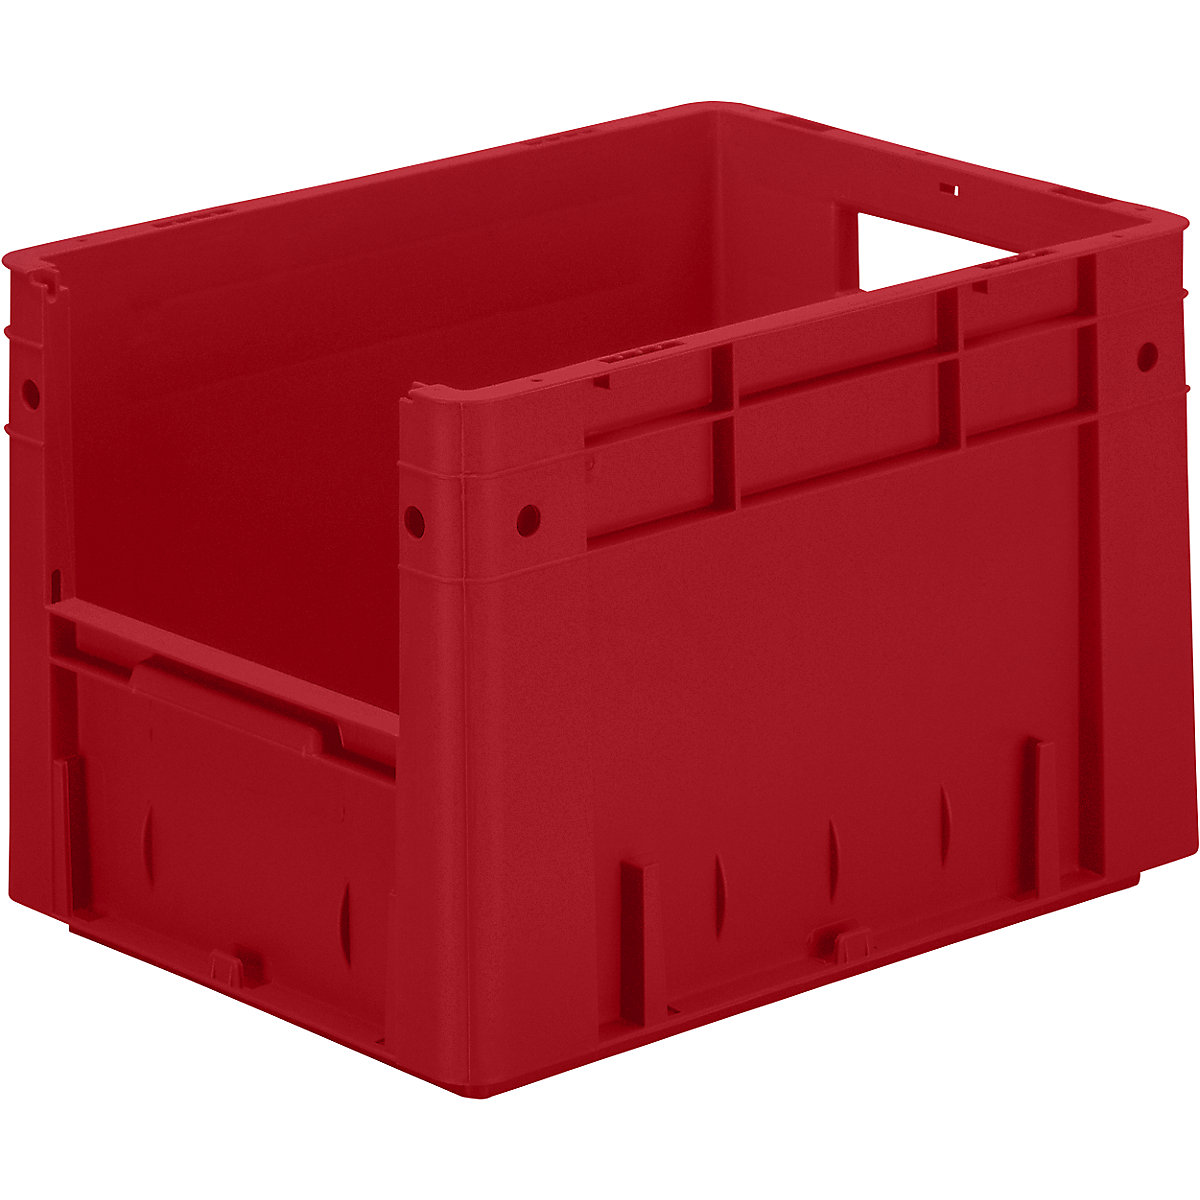 Euro stacking container, capacity 23.3 l, LxWxH 400 x 300 x 270 mm, pack of 4, red-5